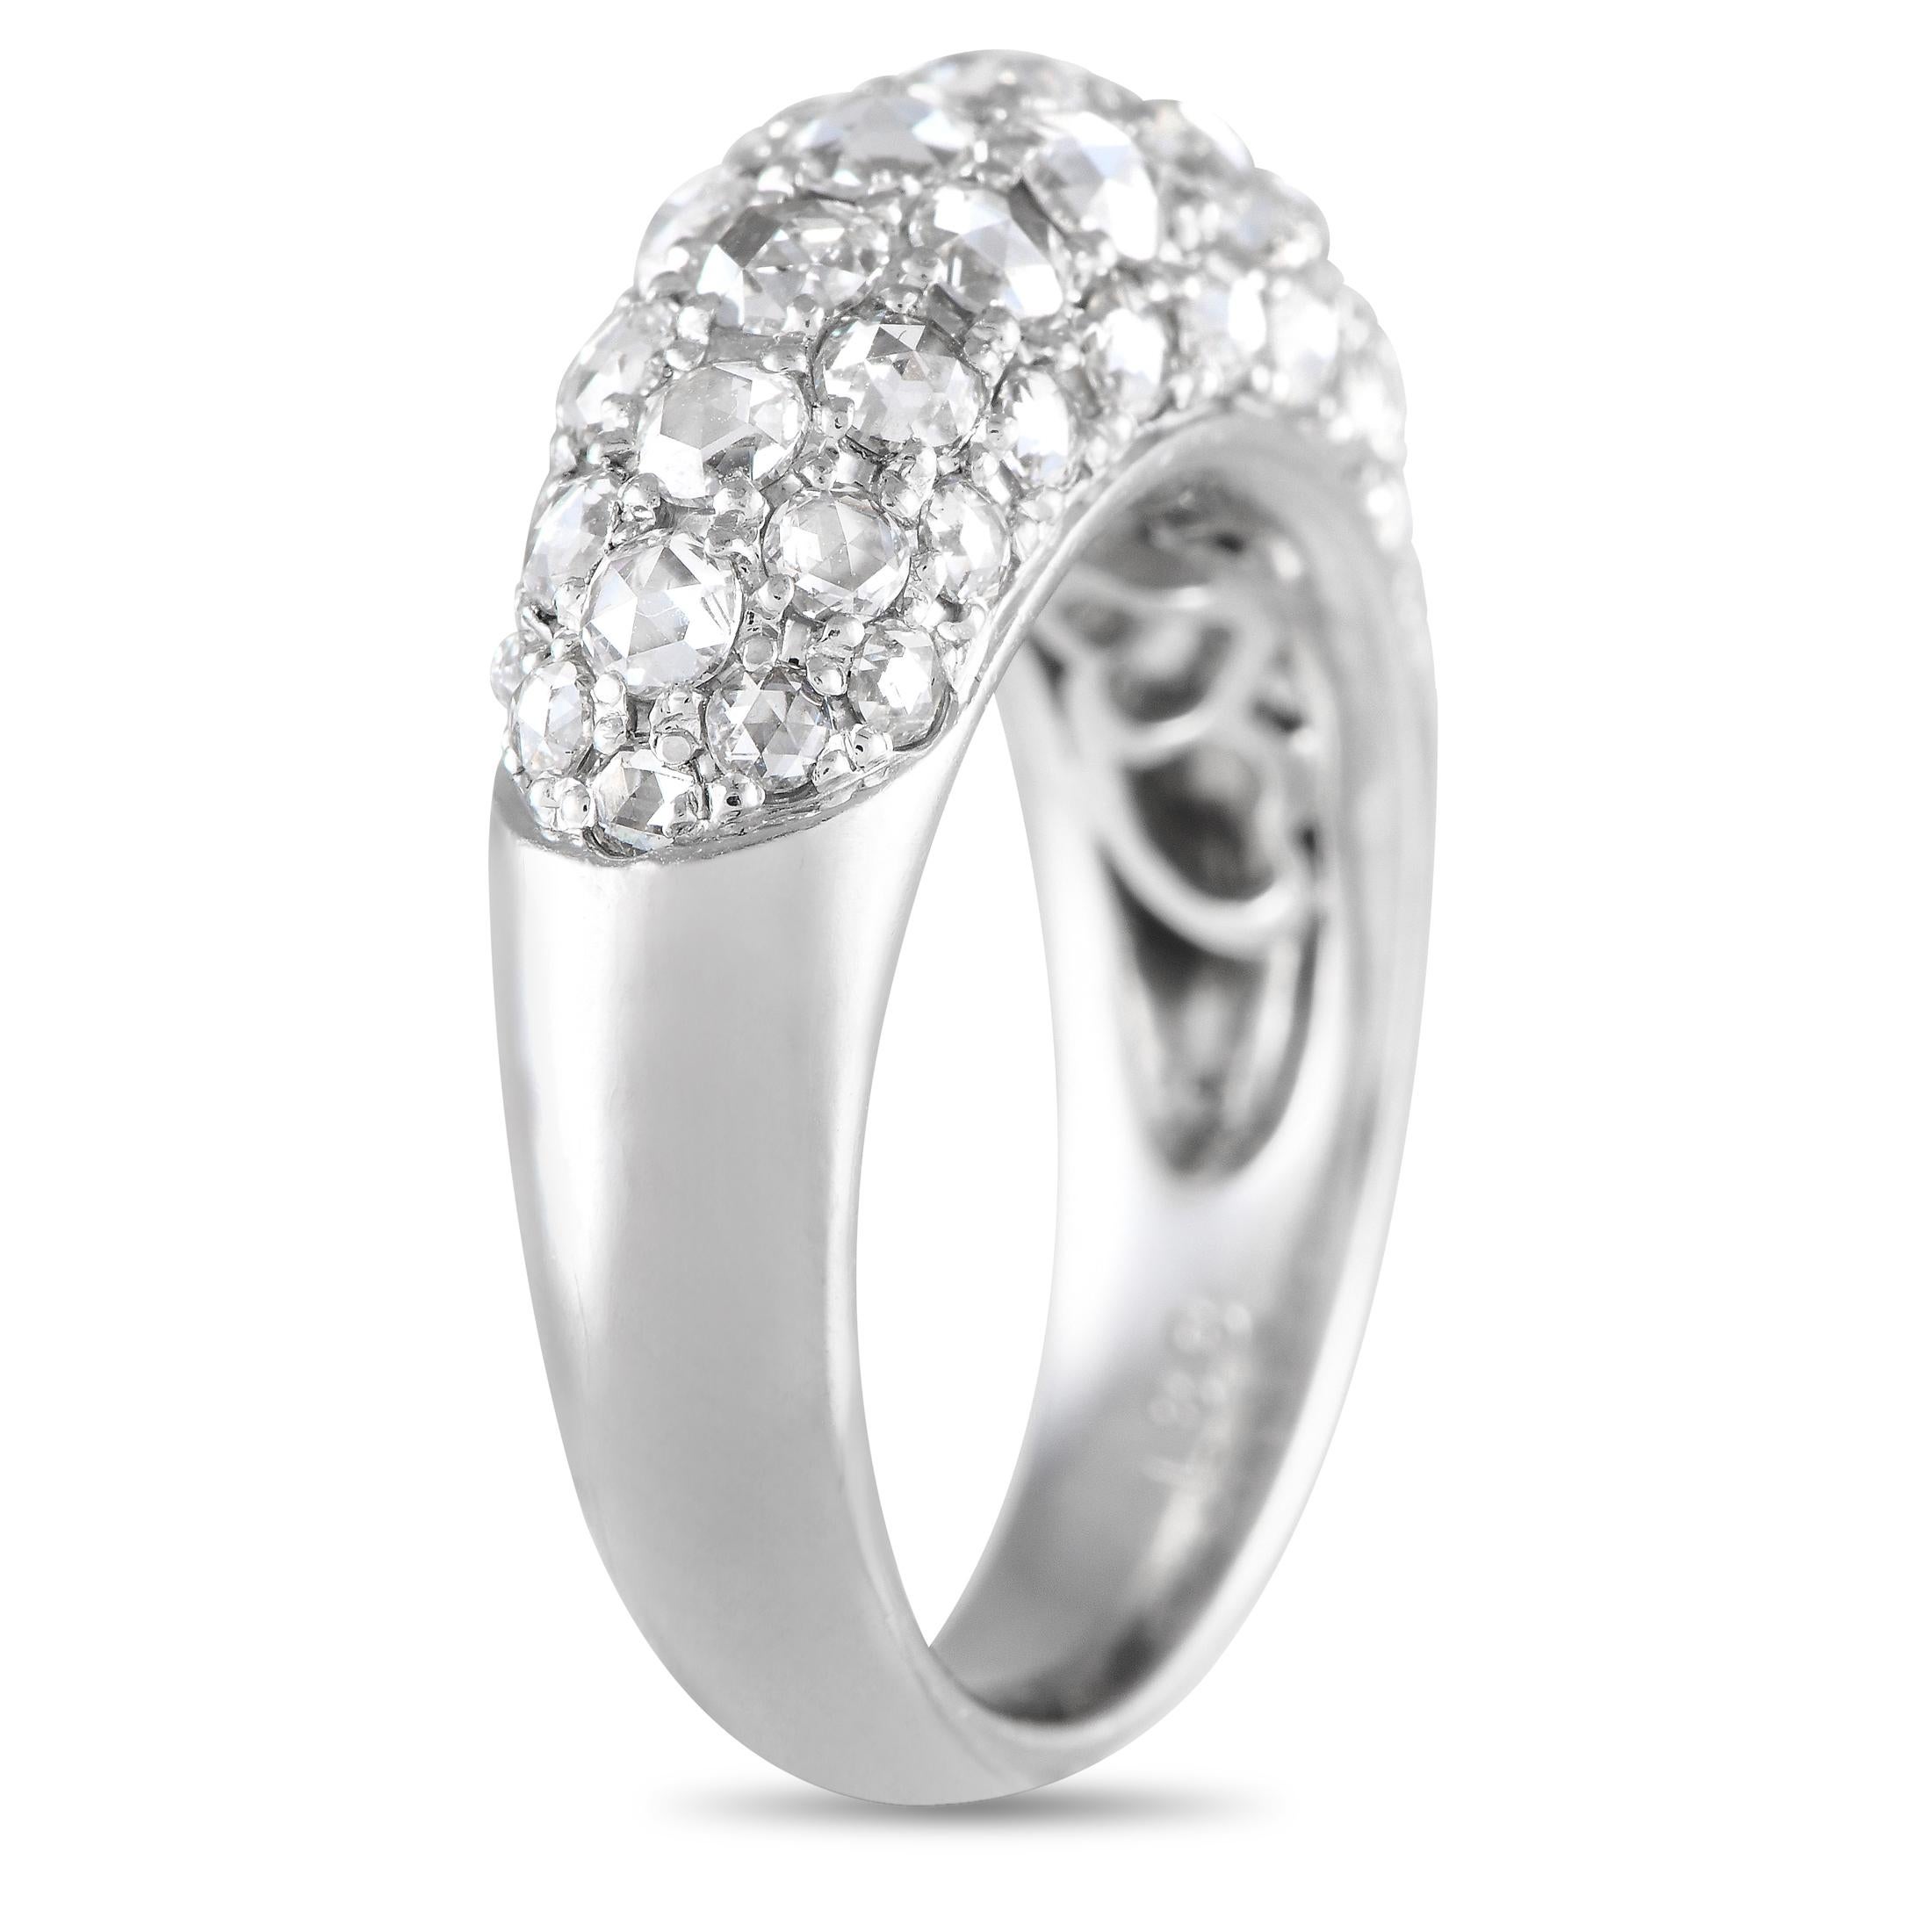 Dazzle a style-savvy woman with the gorgeous sparkle of this ring. The domed band is crafted in platinum, and its top half is covered with round diamonds of varying sizes. A total of 1.88 carats of diamonds bring a stunning shine to this ring. The